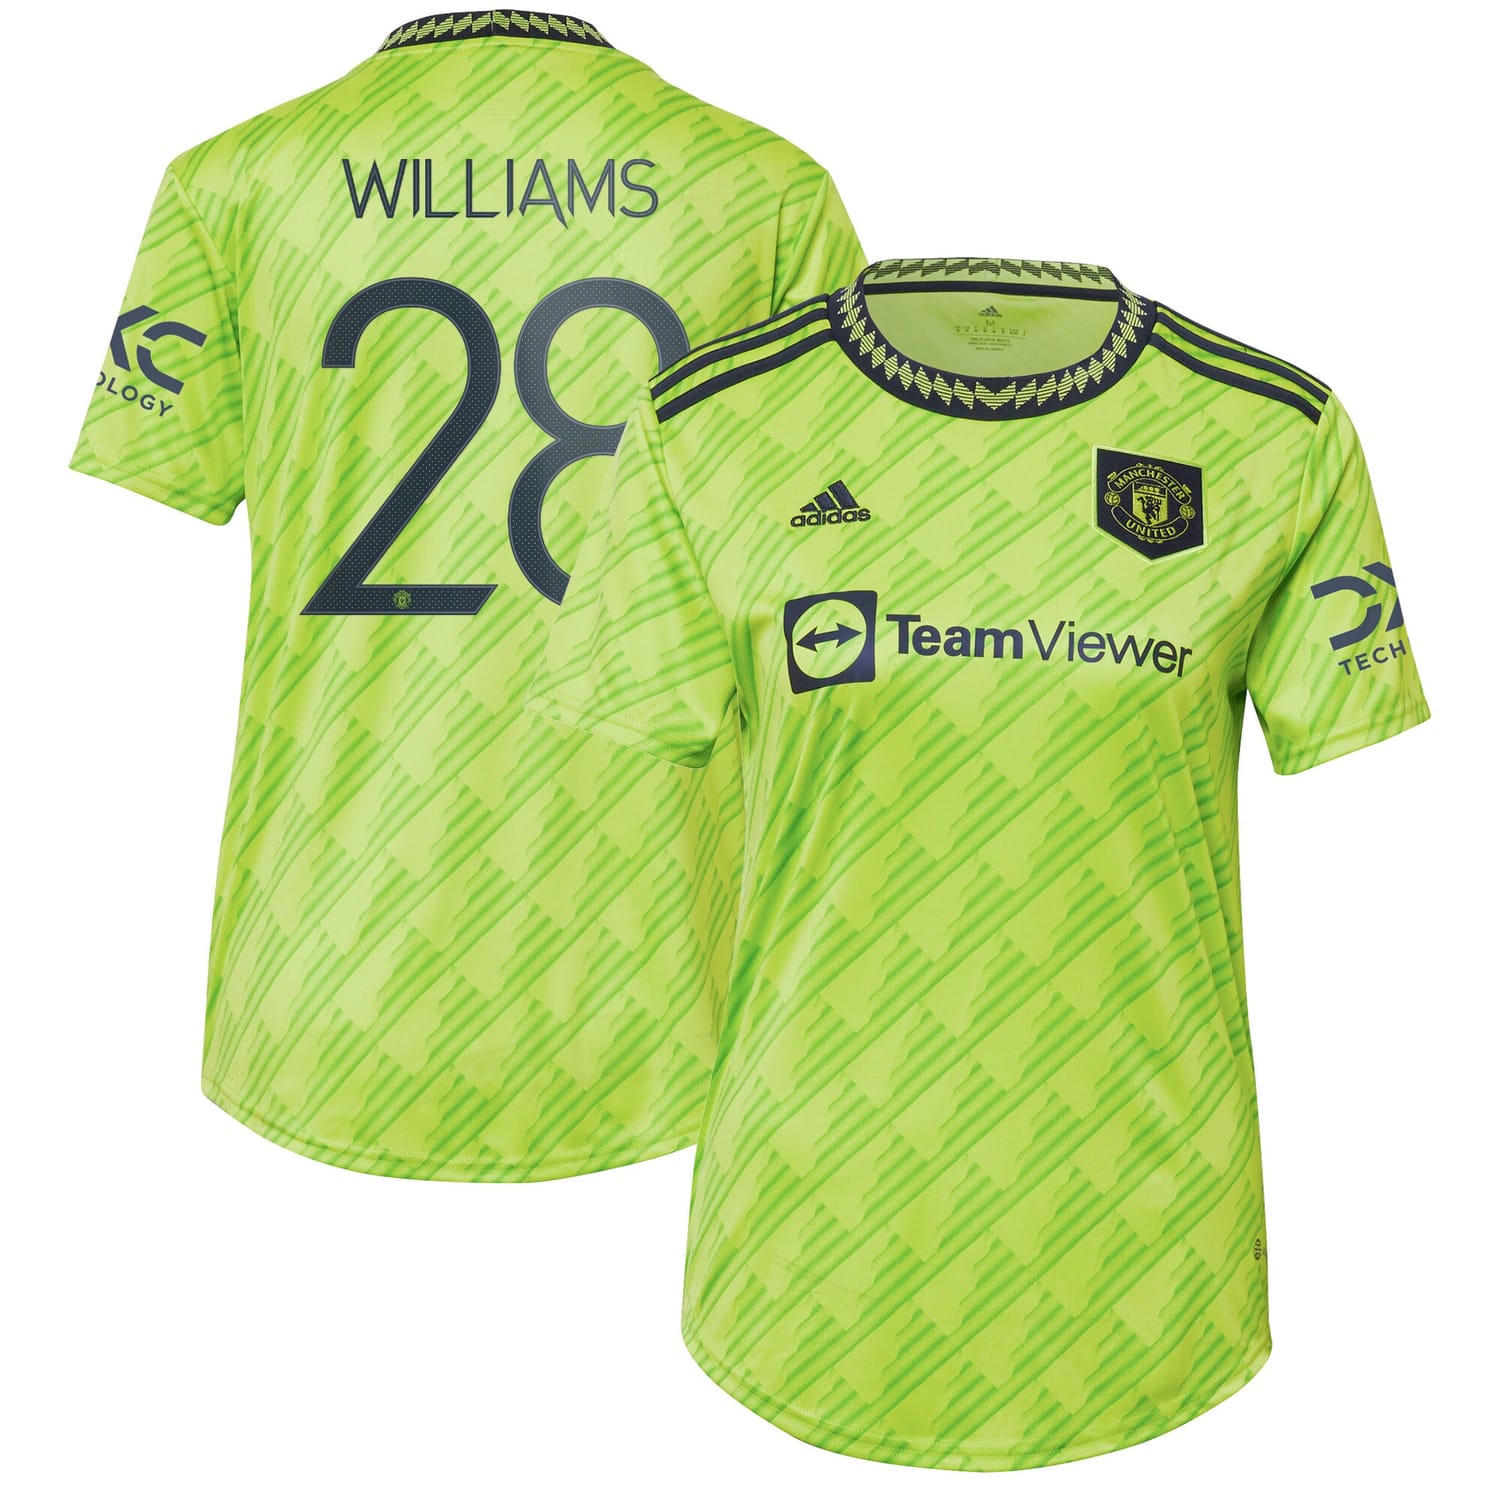 Premier League Manchester United Third Cup Jersey Shirt 2022-23 player Rachel Williams 28 printing for Women